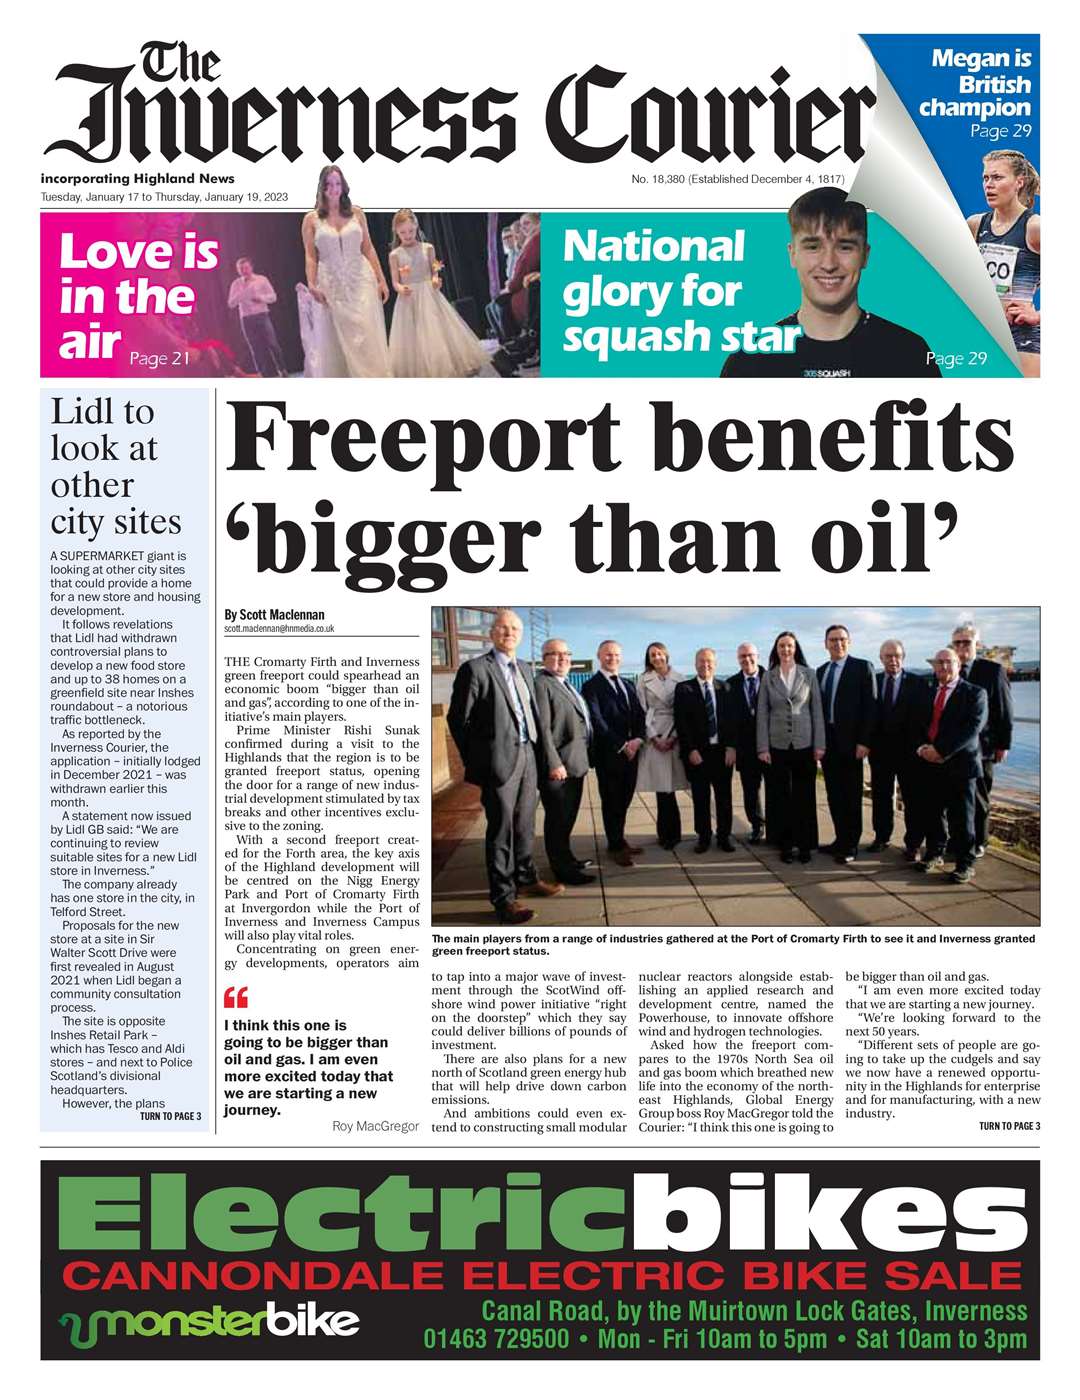 The Inverness Courier, January 17, front page.